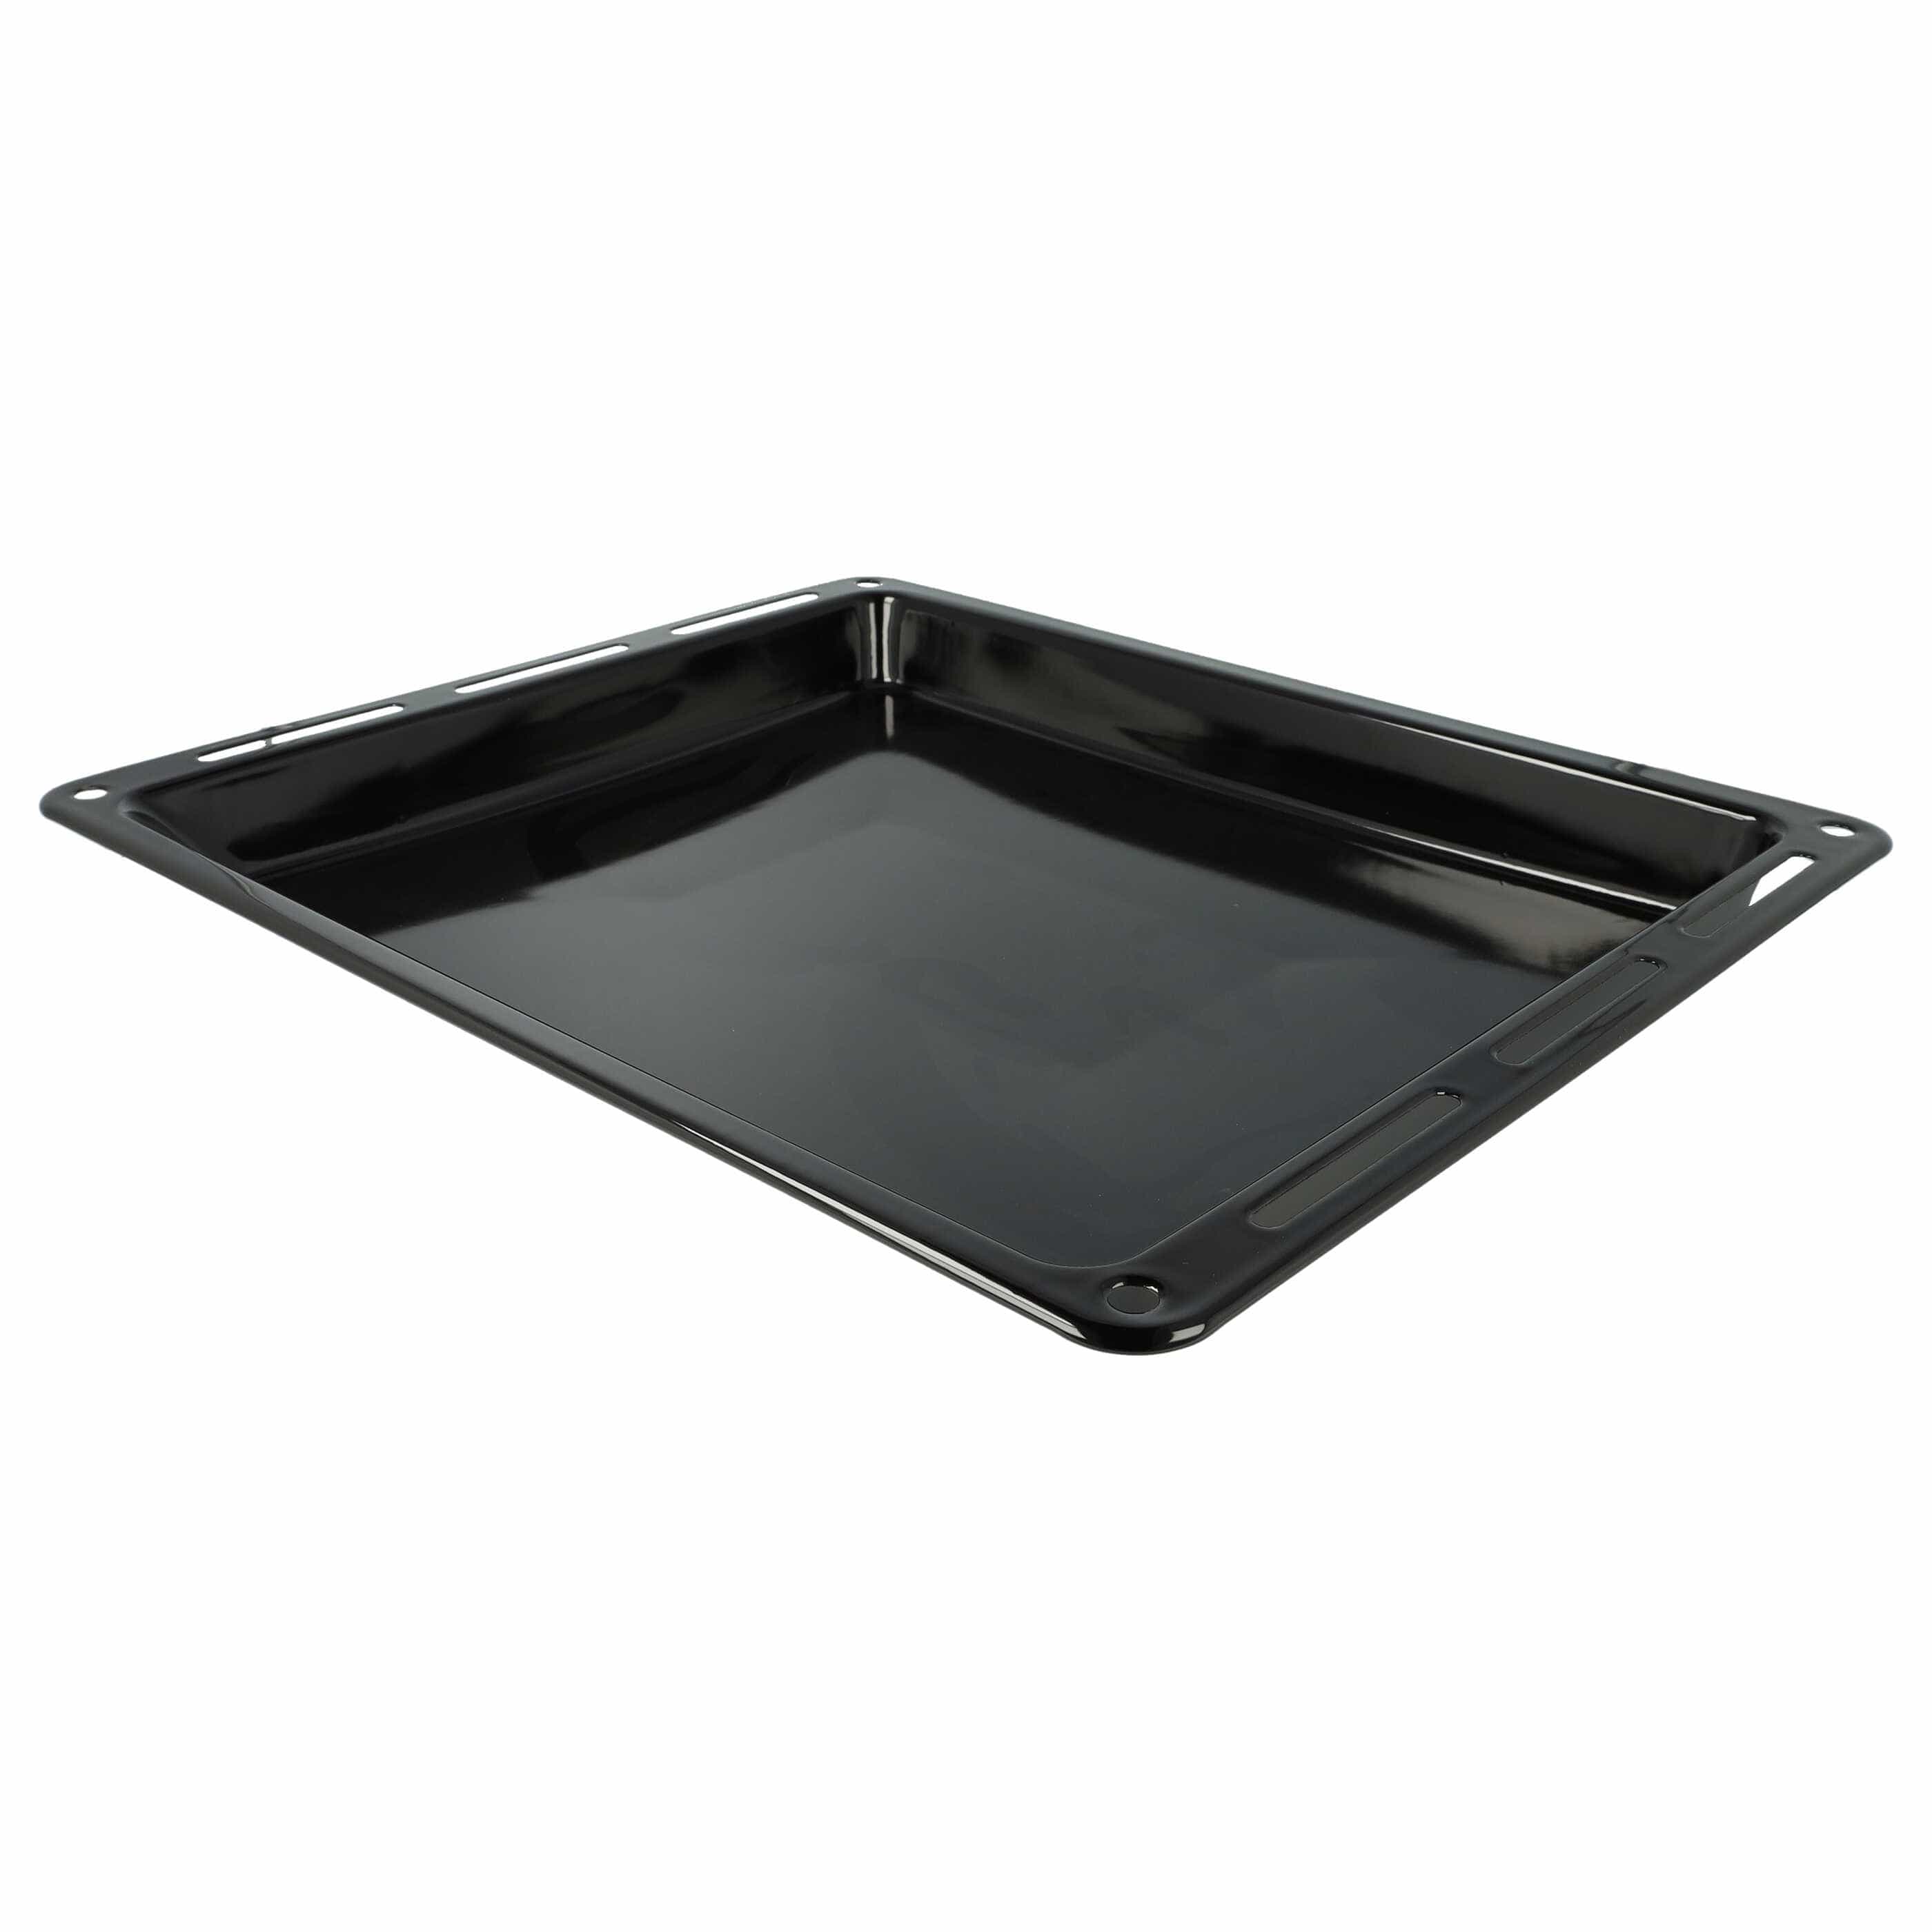 Baking Tray as Replacement for Indesit C00325793, ARI325934, C00325934 Oven - 44.5 x 37.5 x 4.4 cm